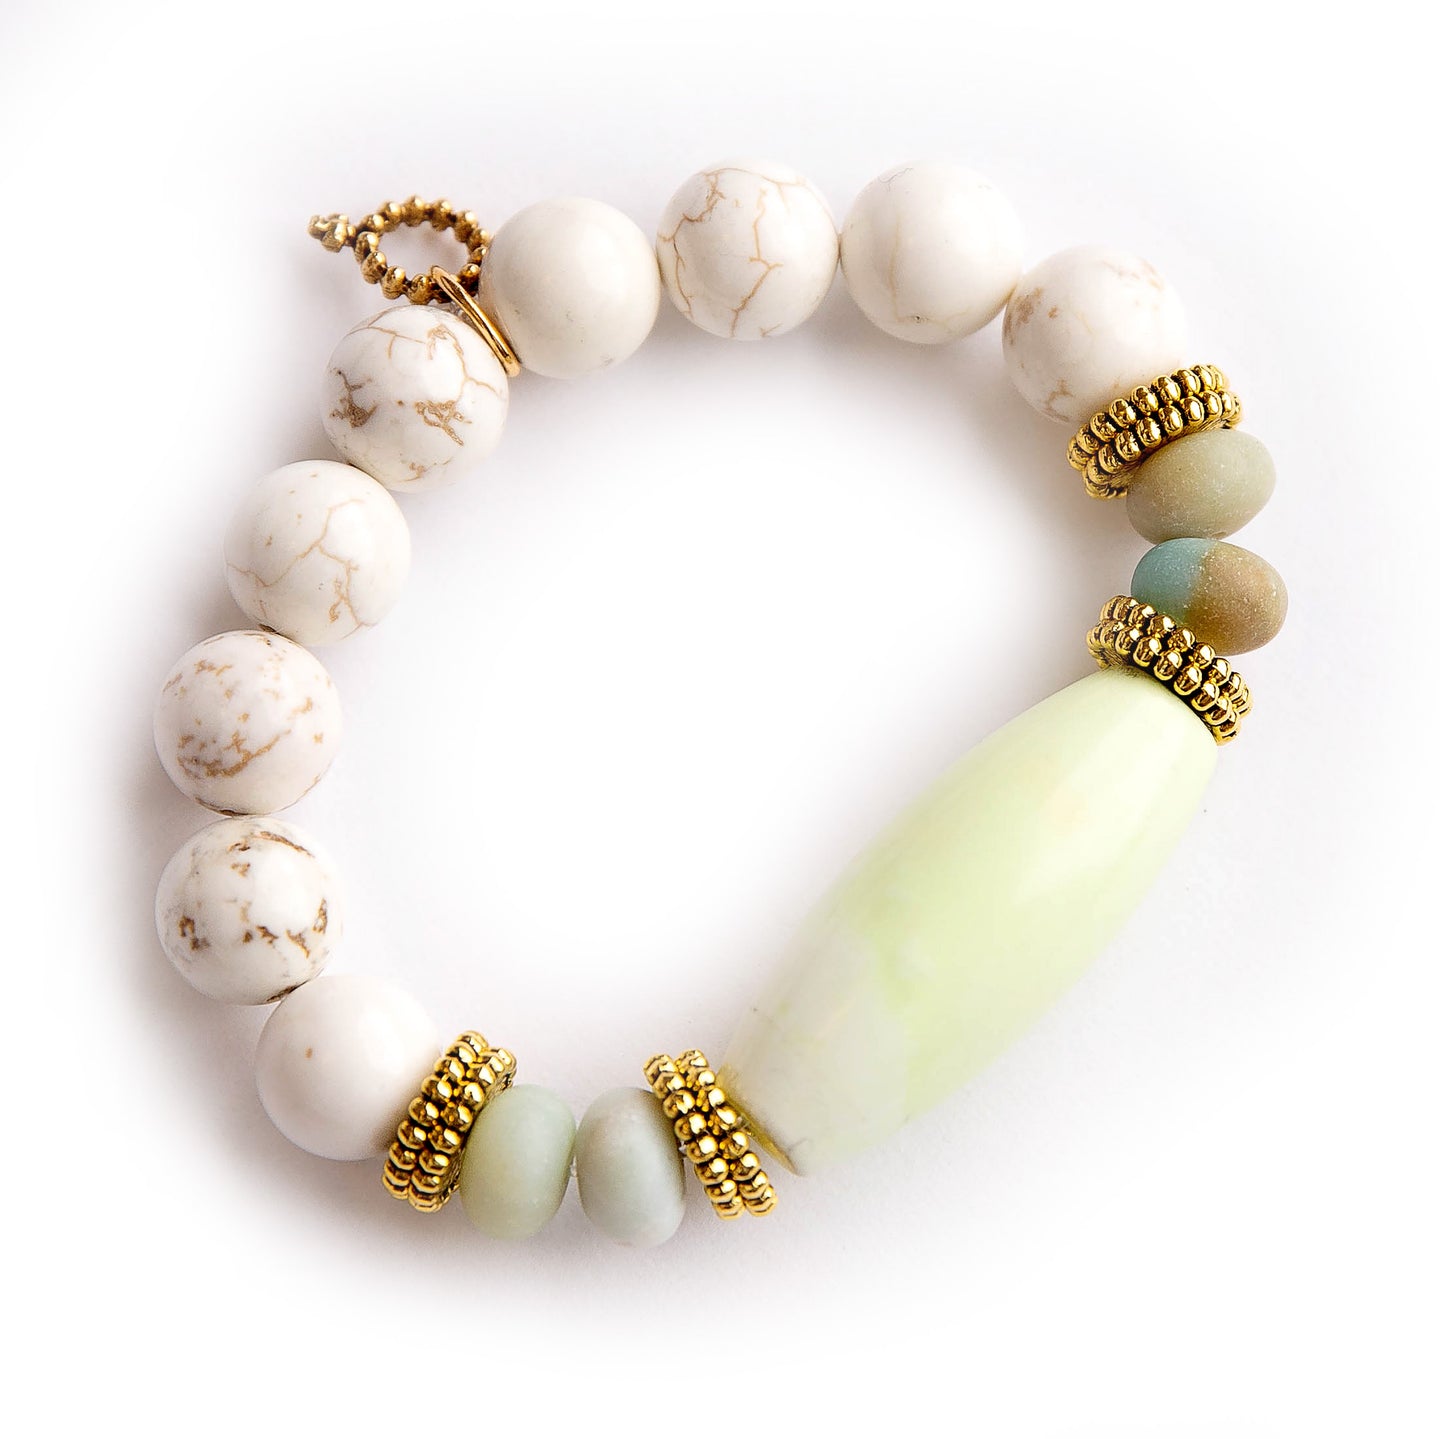 12mm Cream White Howlite paired with brass accents and citron barrel